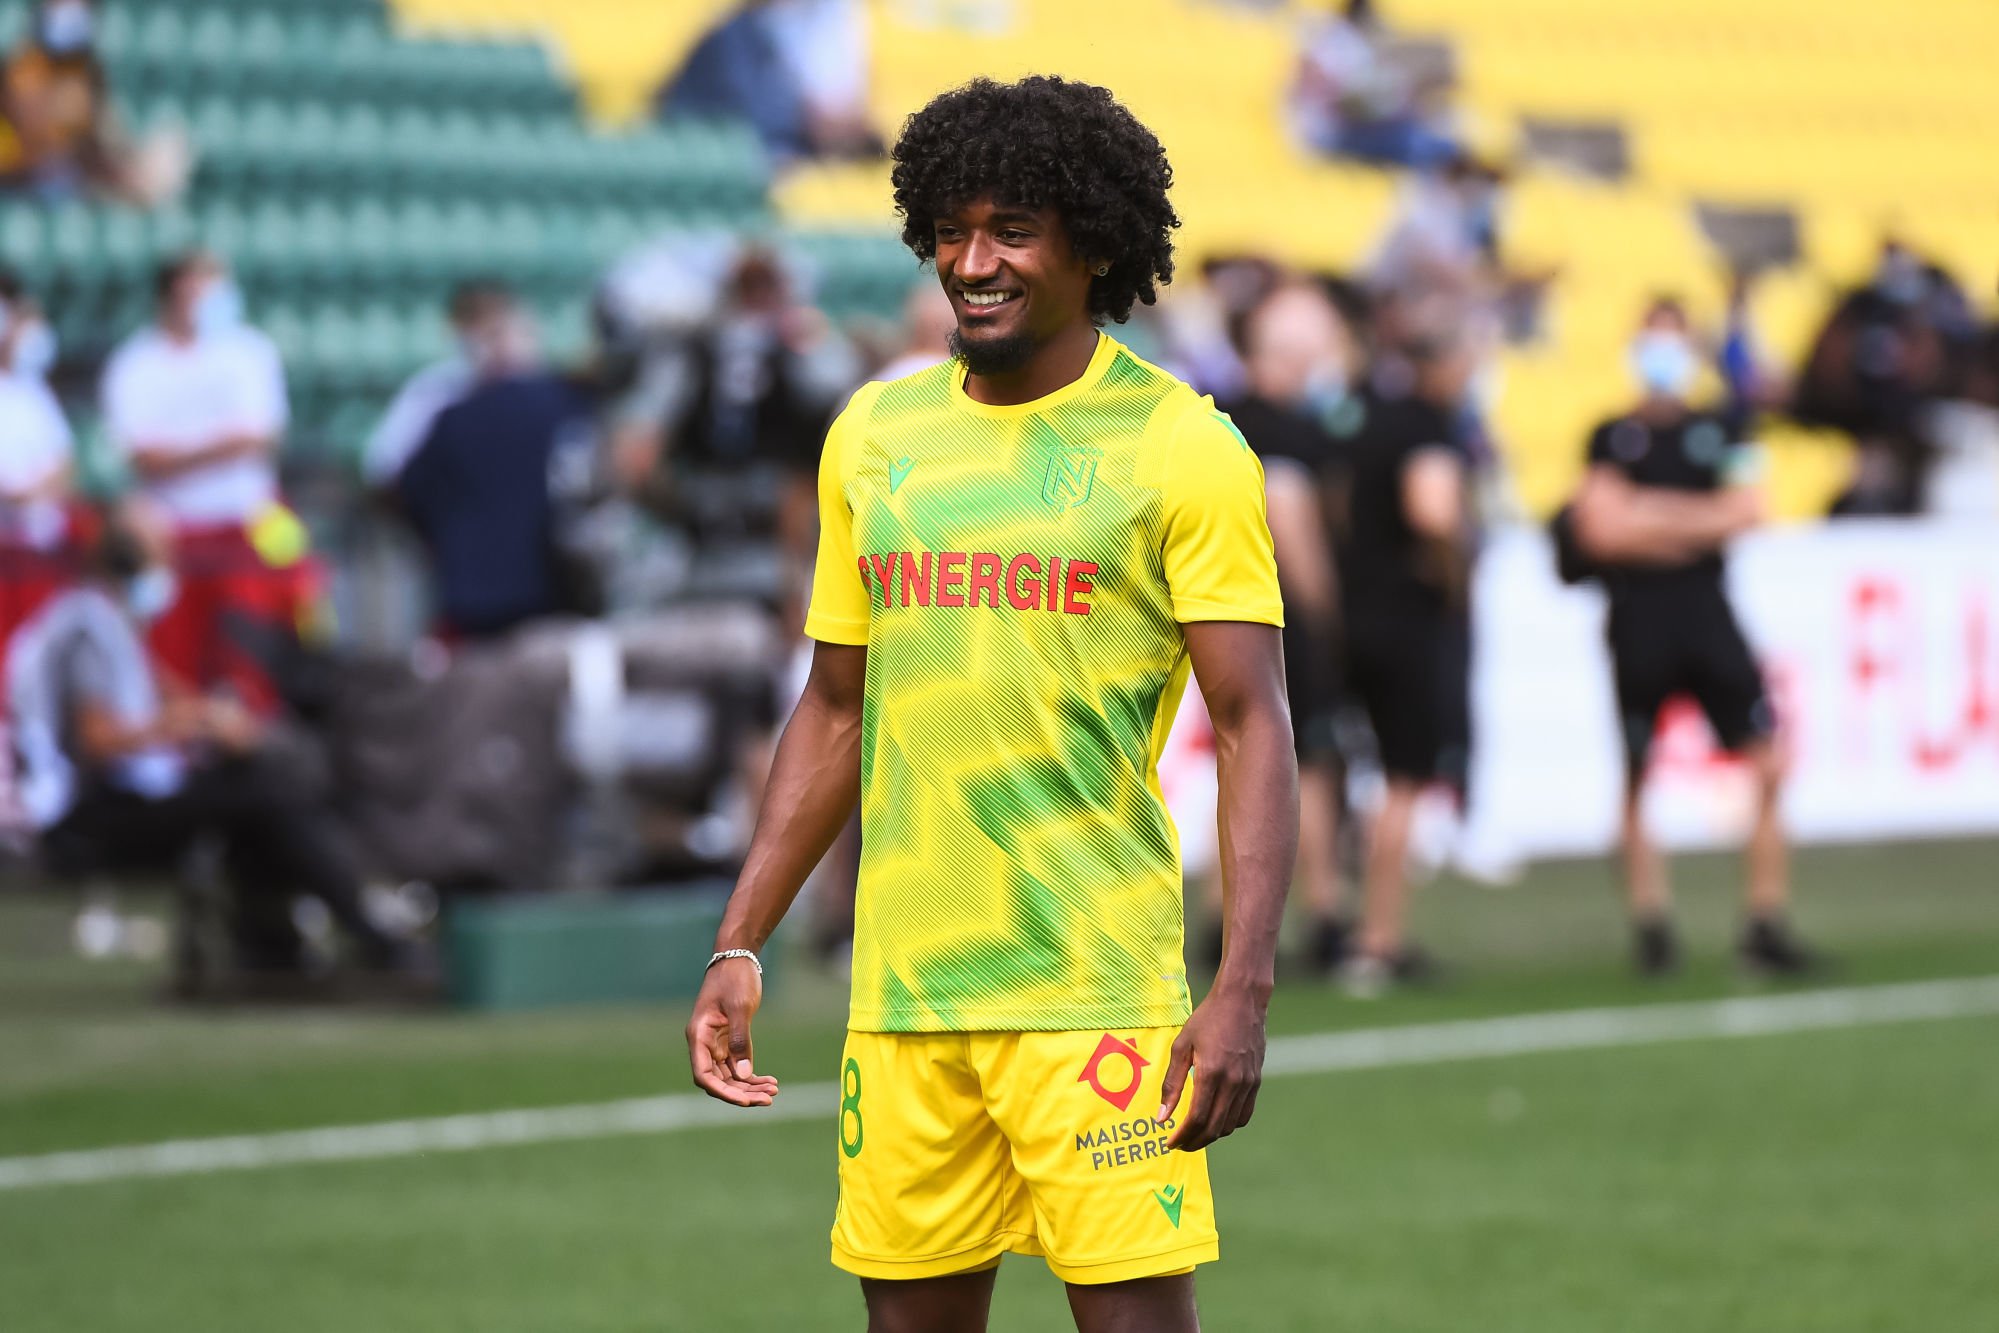 Samuel MOUTOUSSAMY of Nantes warms up before the French Ligue 1 Soccer match between FC Nantes and AS Saint-Etienne at Stade de la Beaujoire on September 20, 2020 in Nantes, France. (Photo by Baptiste Fernandez/Icon Sport) - Samuel MOUTOUSSAMY - Stade de La Beaujoire - Louis Fonteneau - Nantes (France)